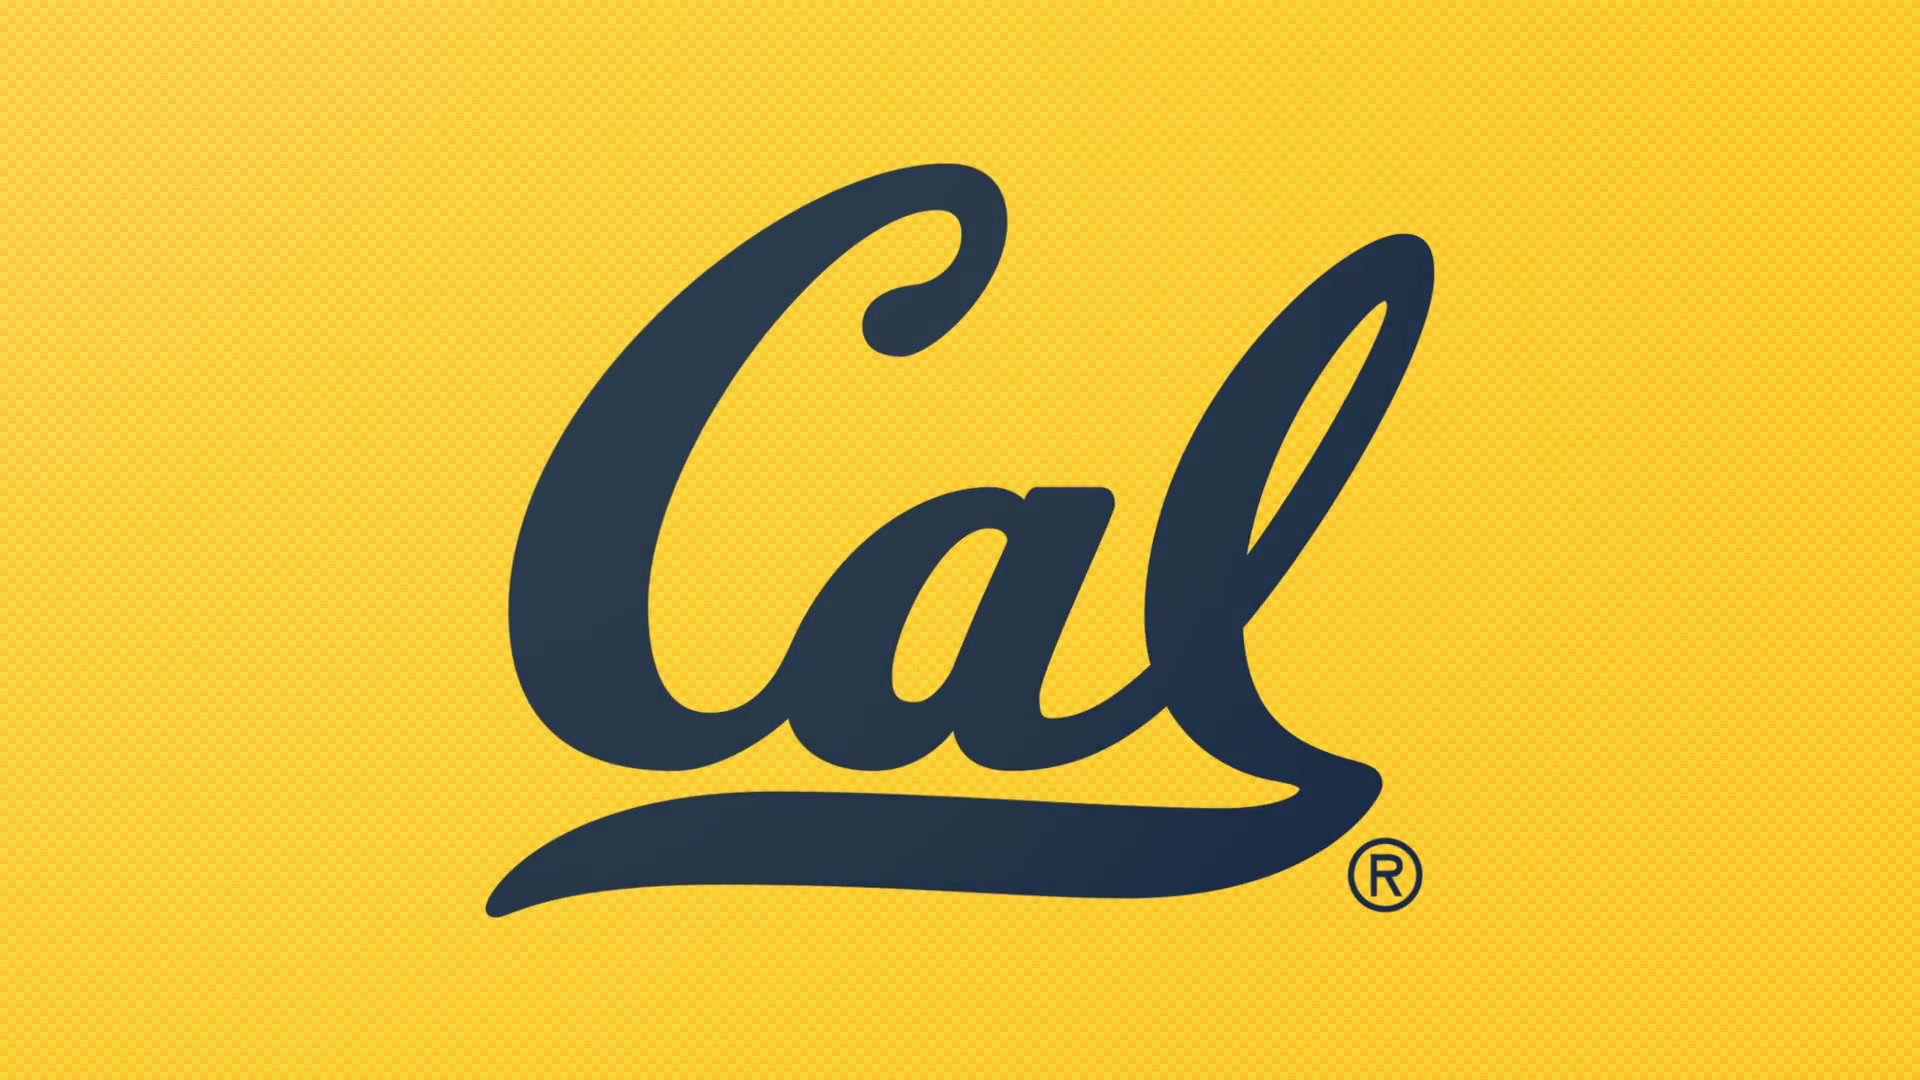 Cal Women's Water Polo: NCAA Championships (UCIrvine)